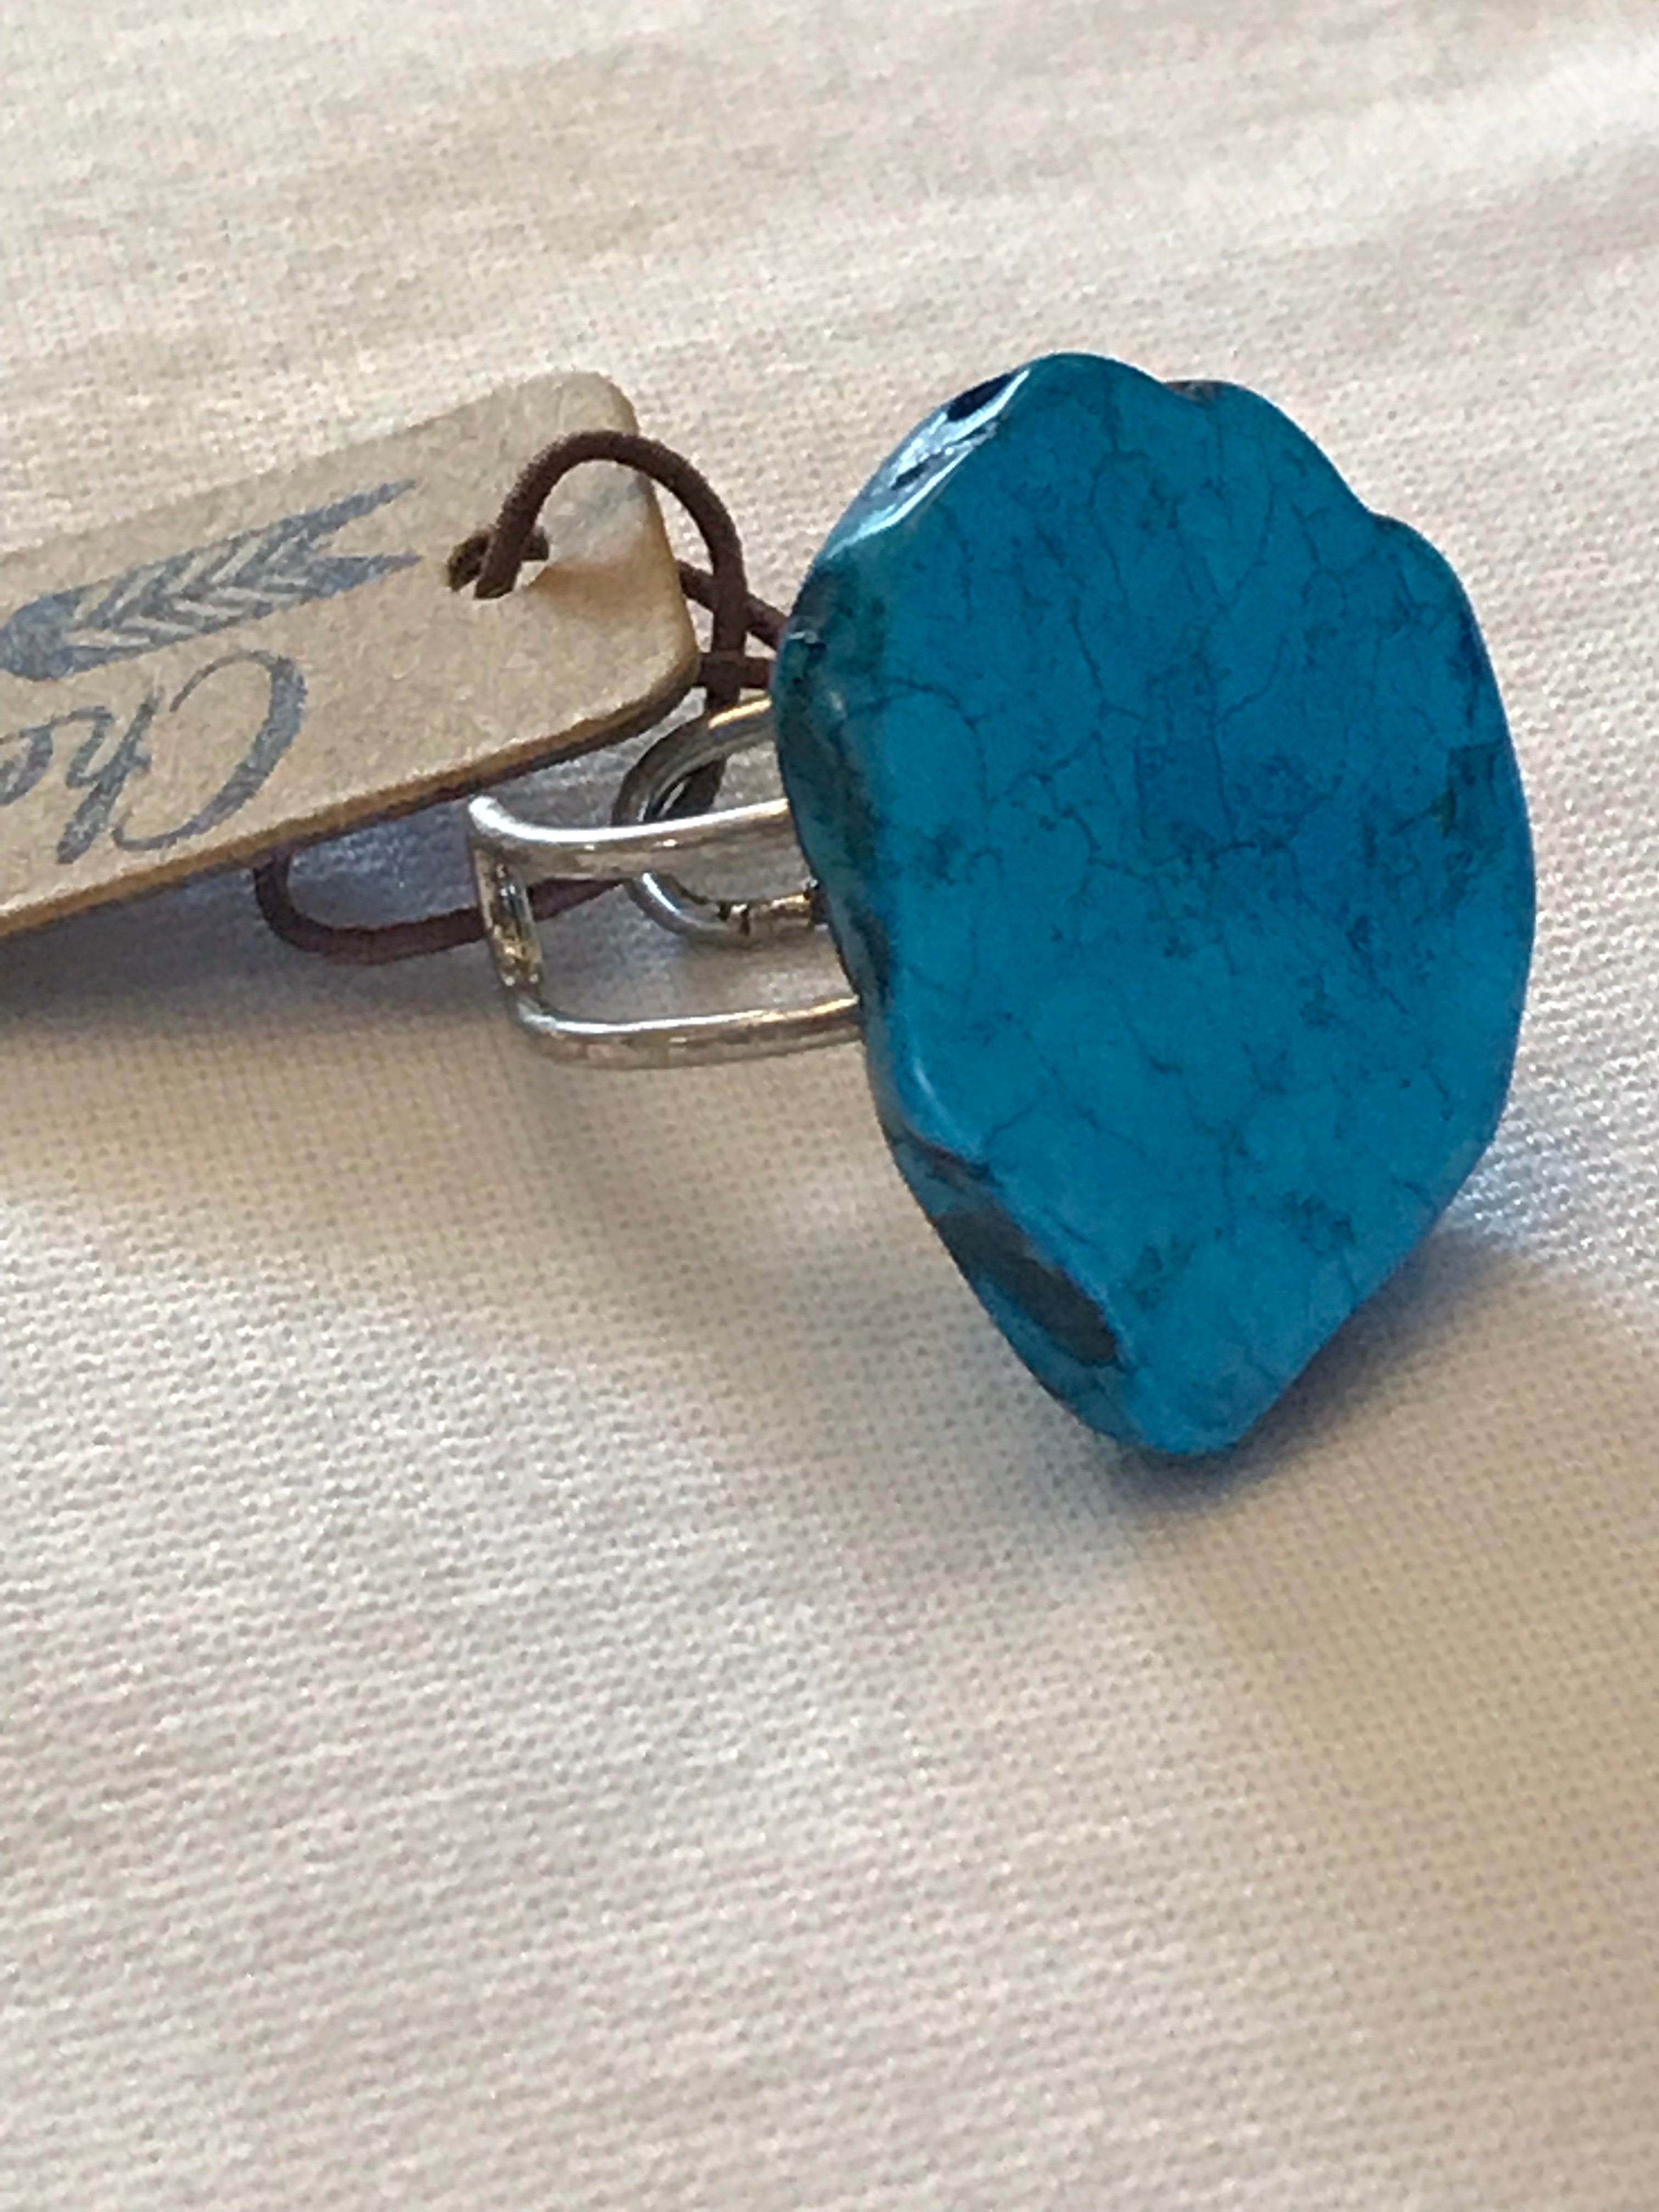 Cheekys Turquoise Ivory Stone Adjustable Ring